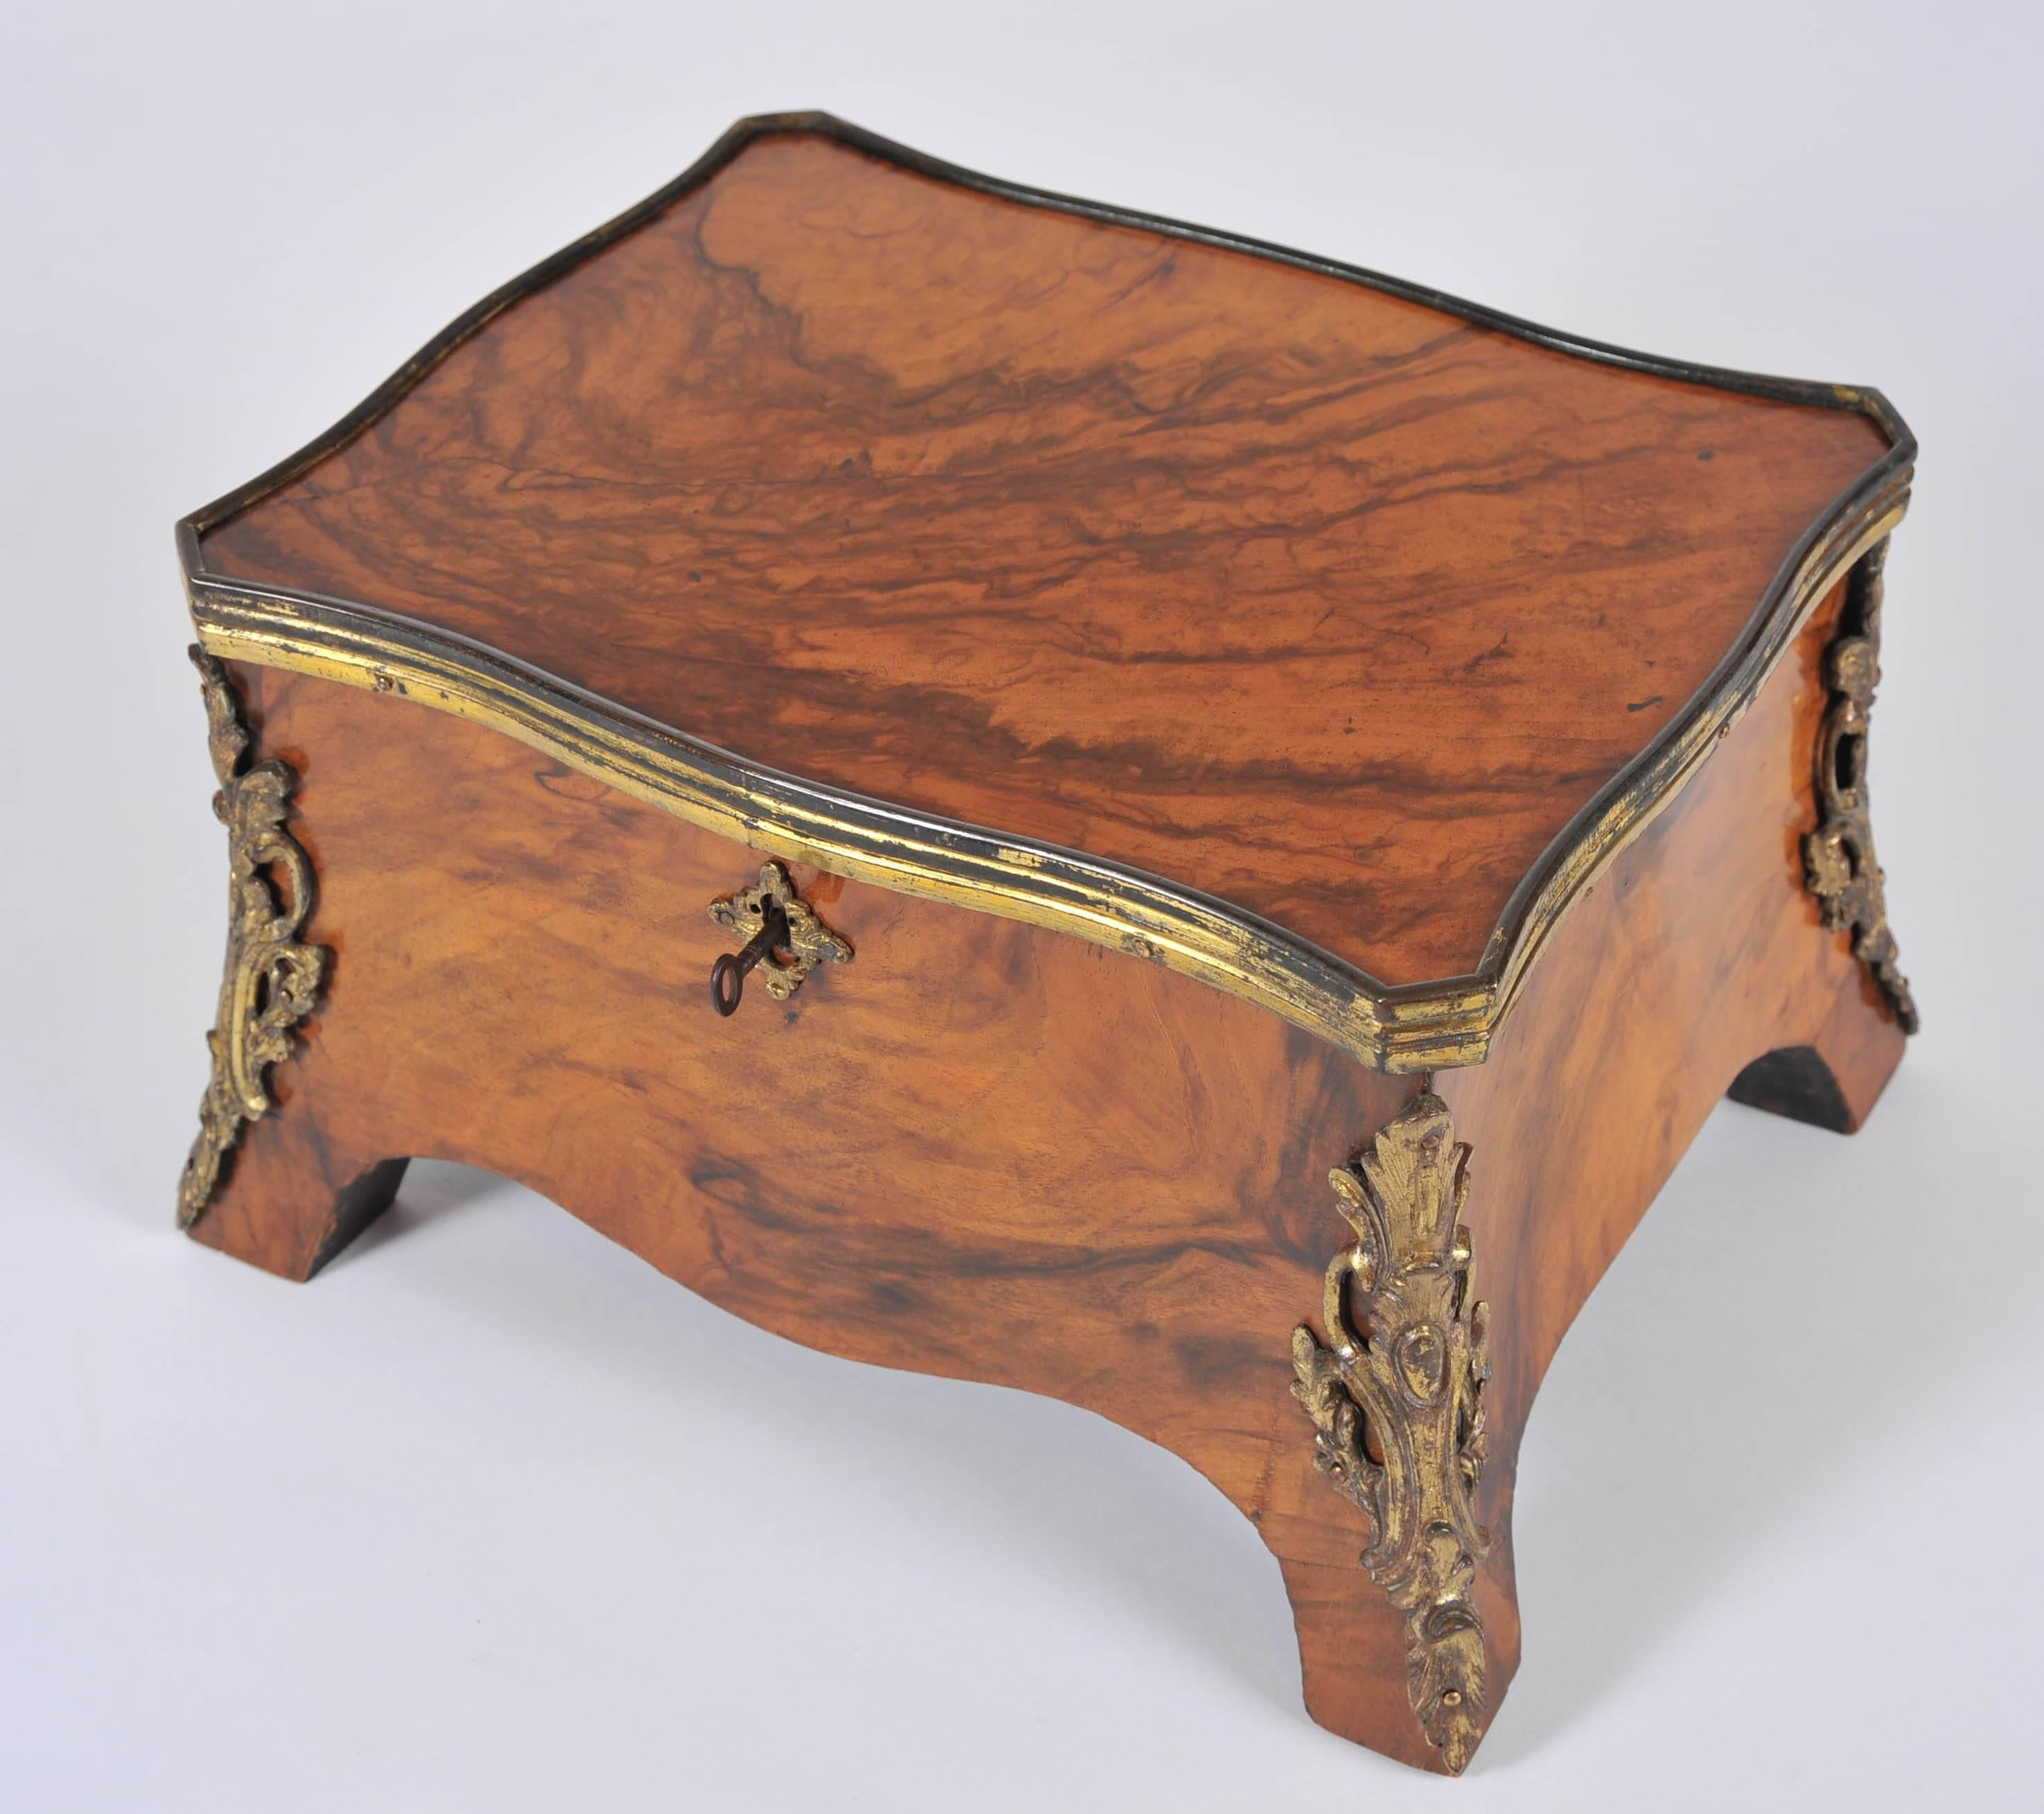 Mid-19th Century Decorative Box, Walnut and Ormolu Mounted, Grand Tour Style For Sale 2